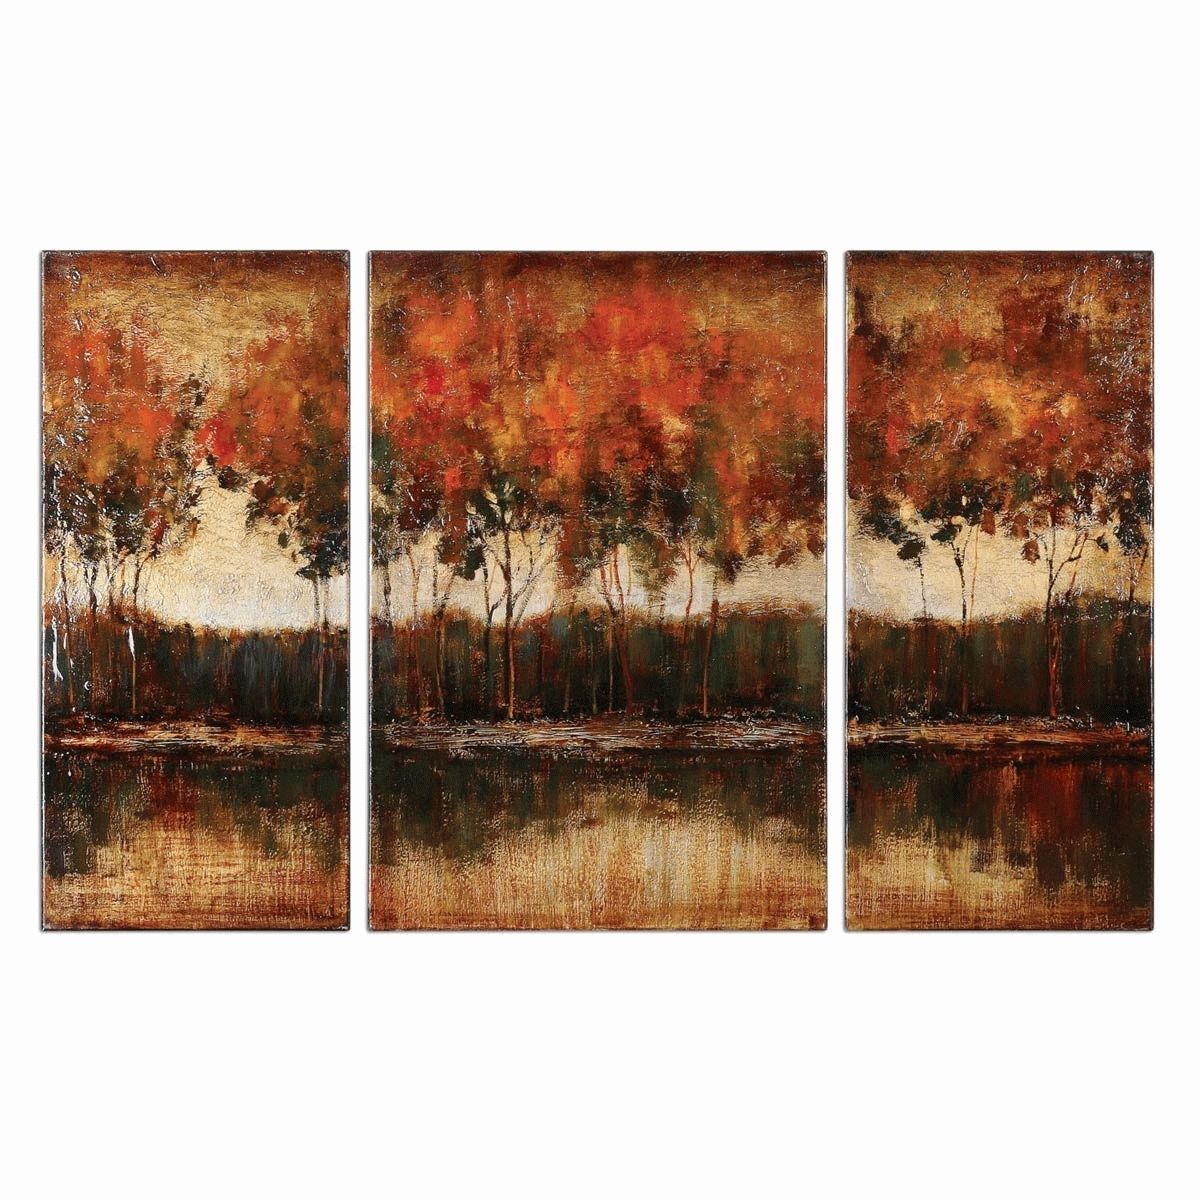 Trilakes Canvas Wall Art – Set Of 3 With Regard To Most Recent Canvas Wall Art Sets Of  (View 1 of 25)